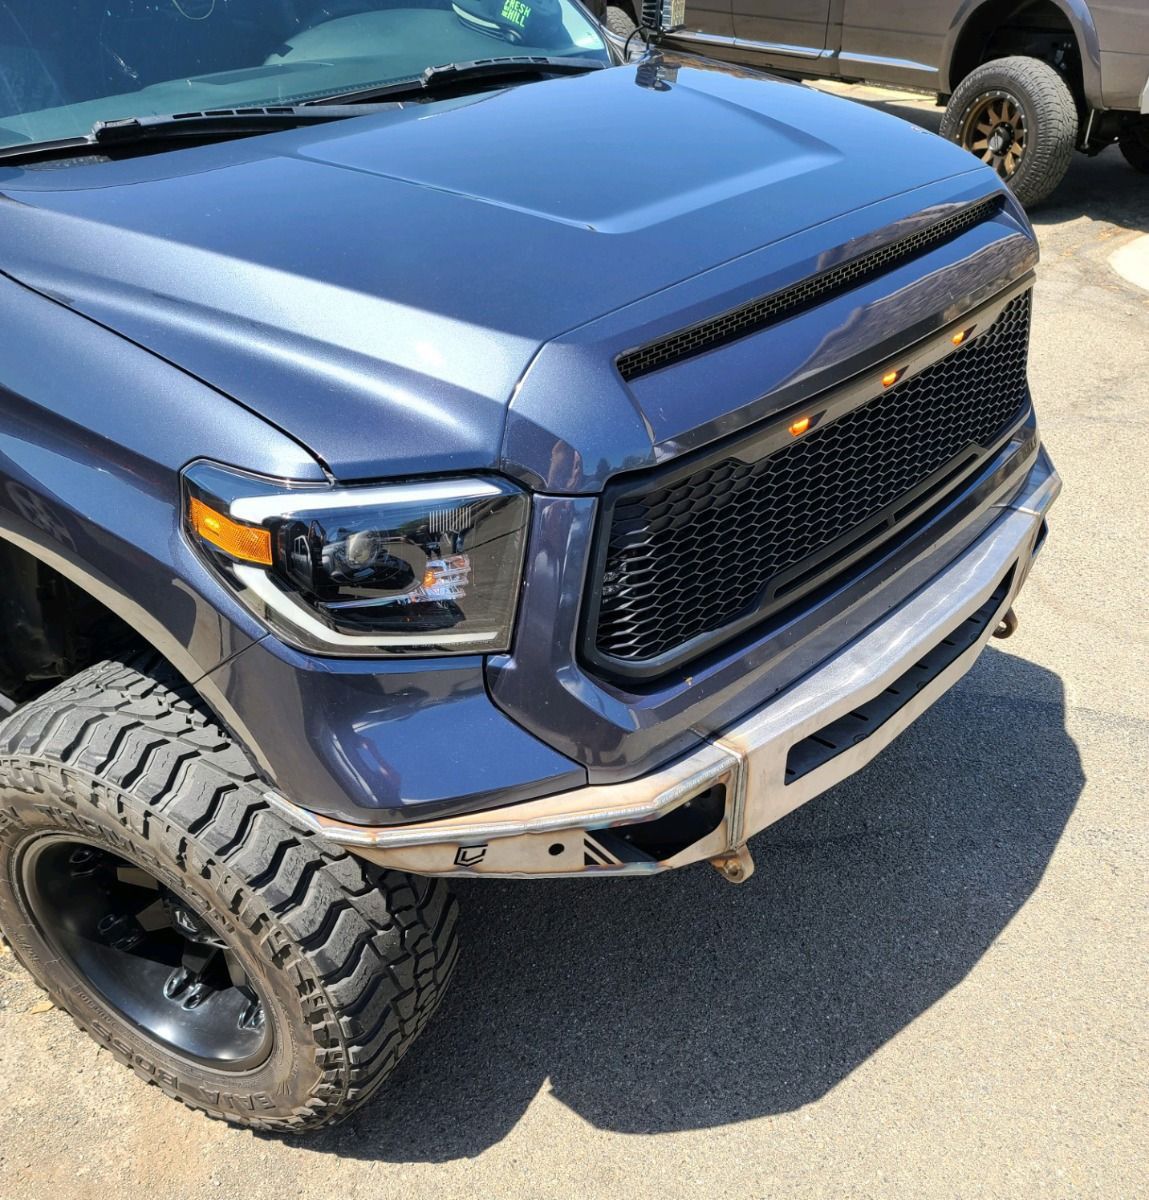 Toyota TUNDRA High Clearance Bumpers 07-20